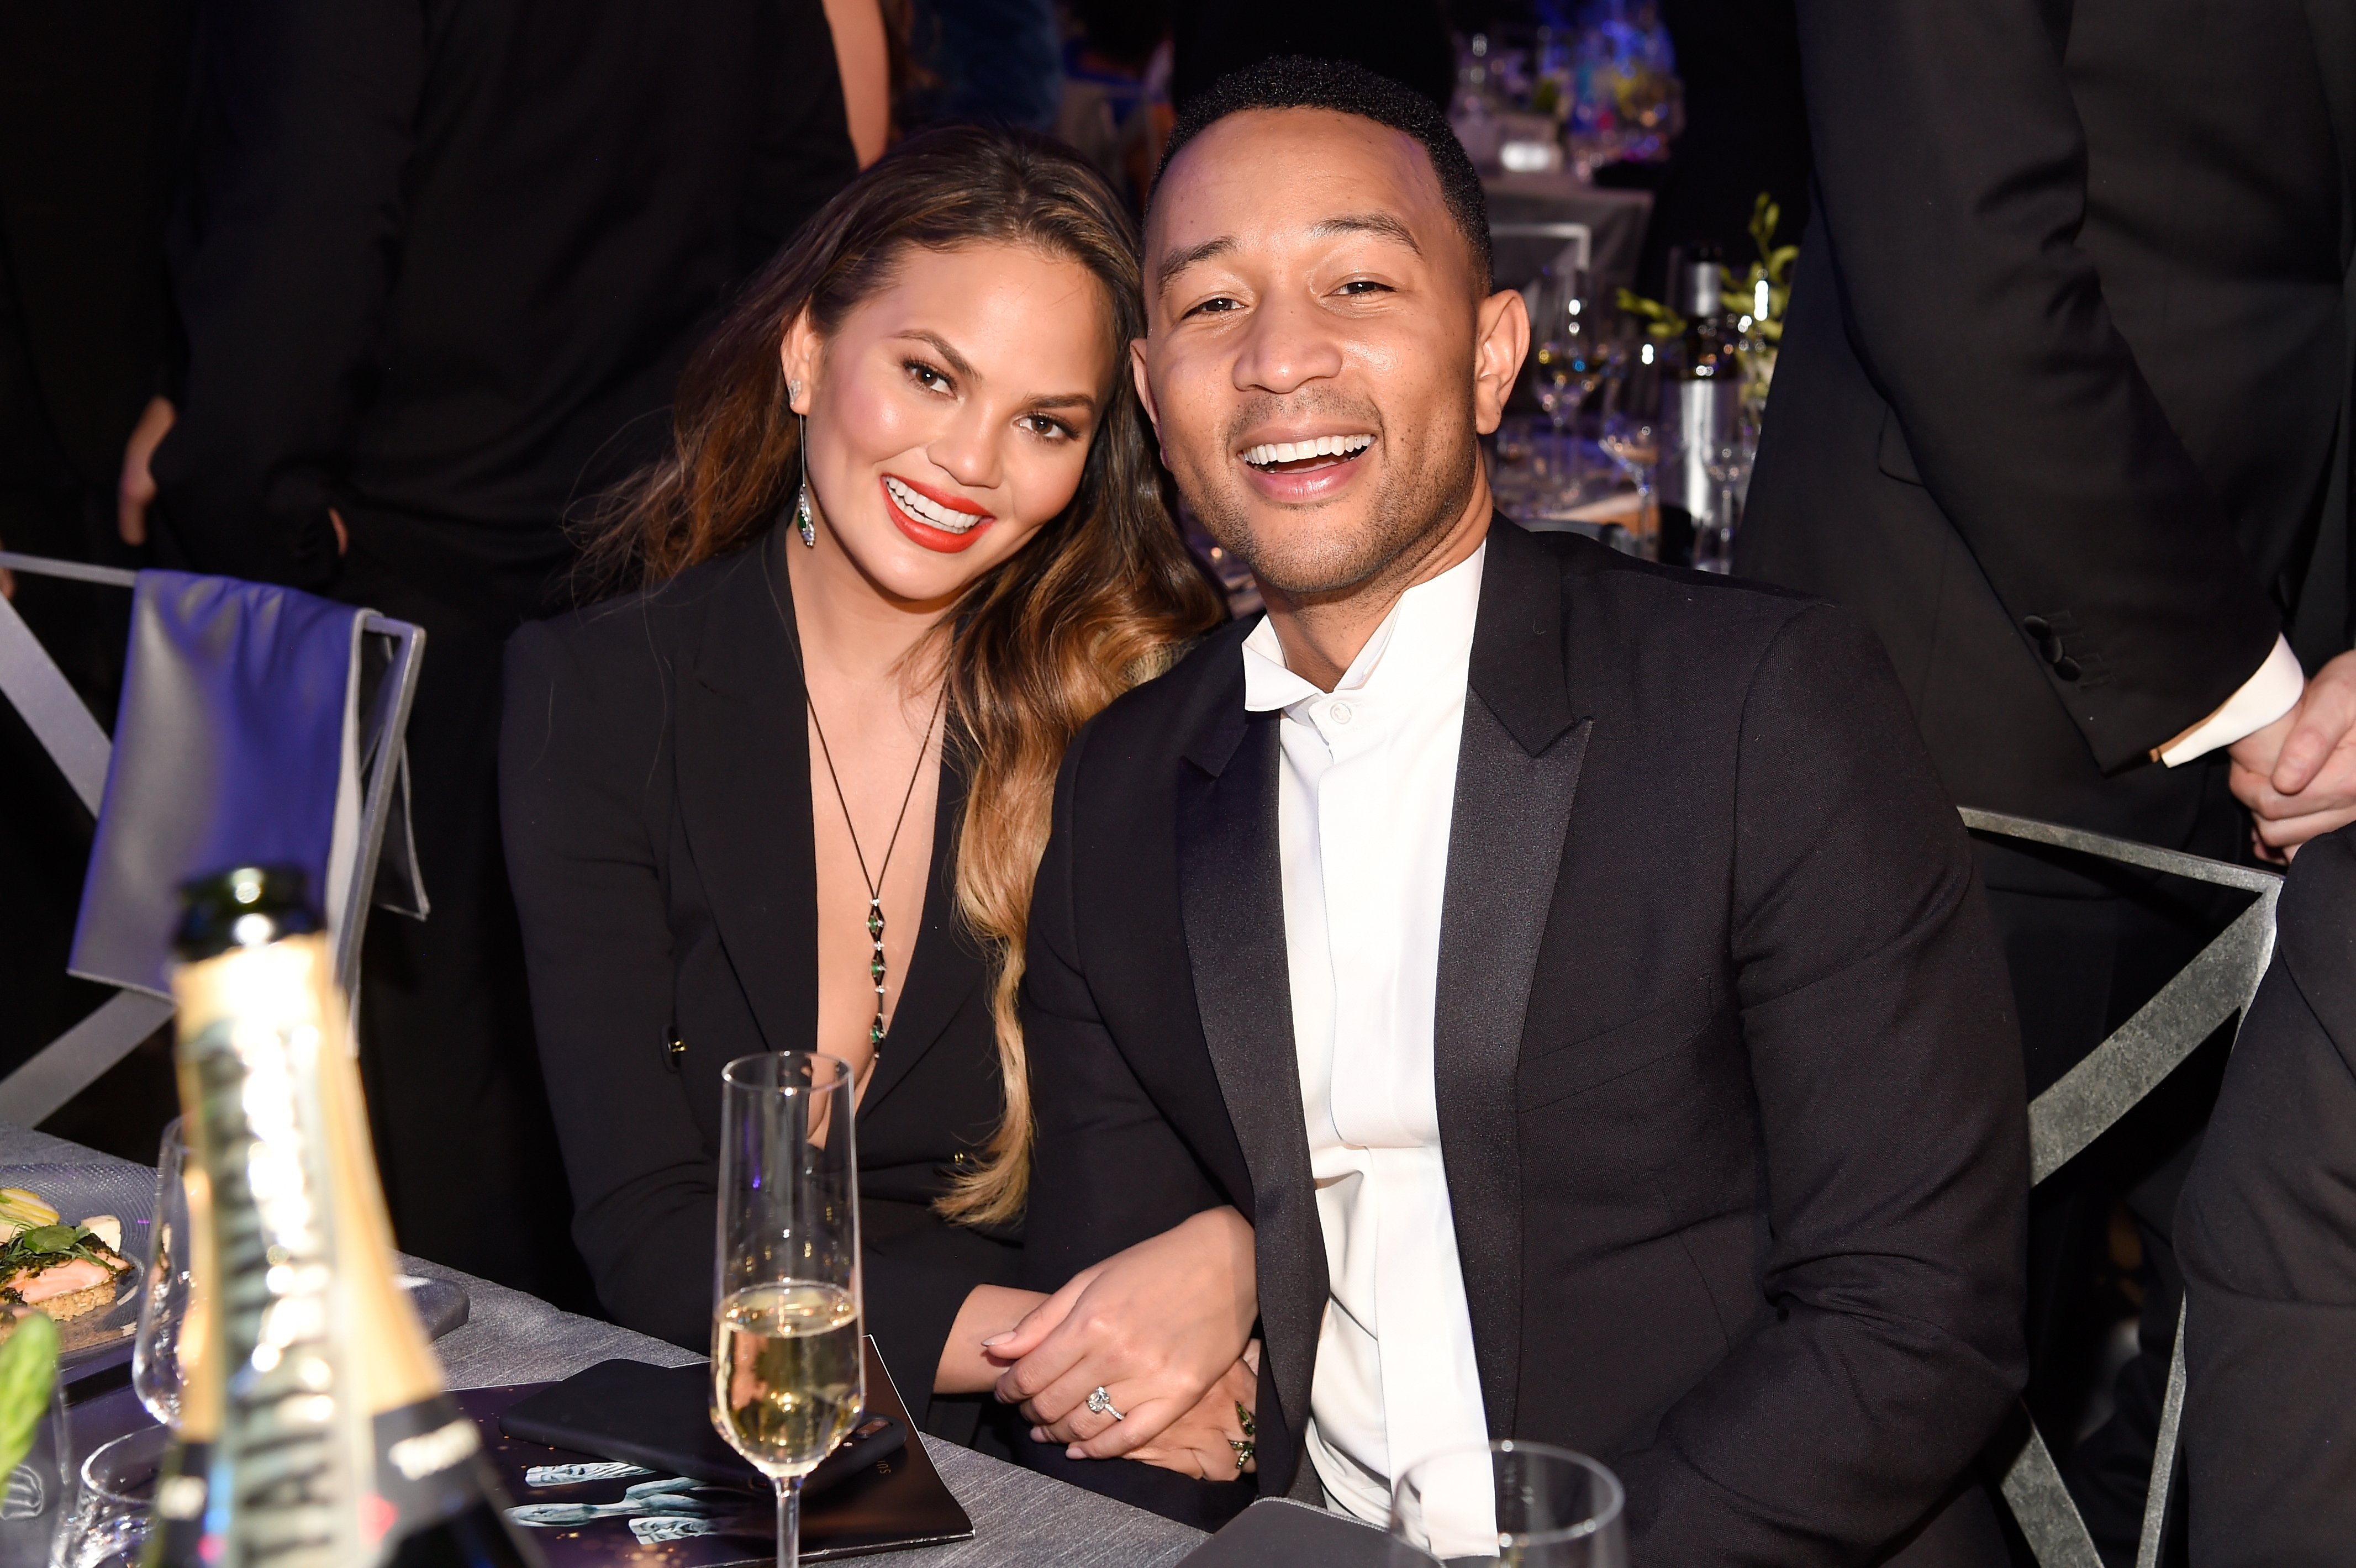 Chrissy Teigen and John Legend during The 23rd Annual Screen Actors Guild Awards on January 29, 2017 in Los Angeles, California | Photo: Getty Images